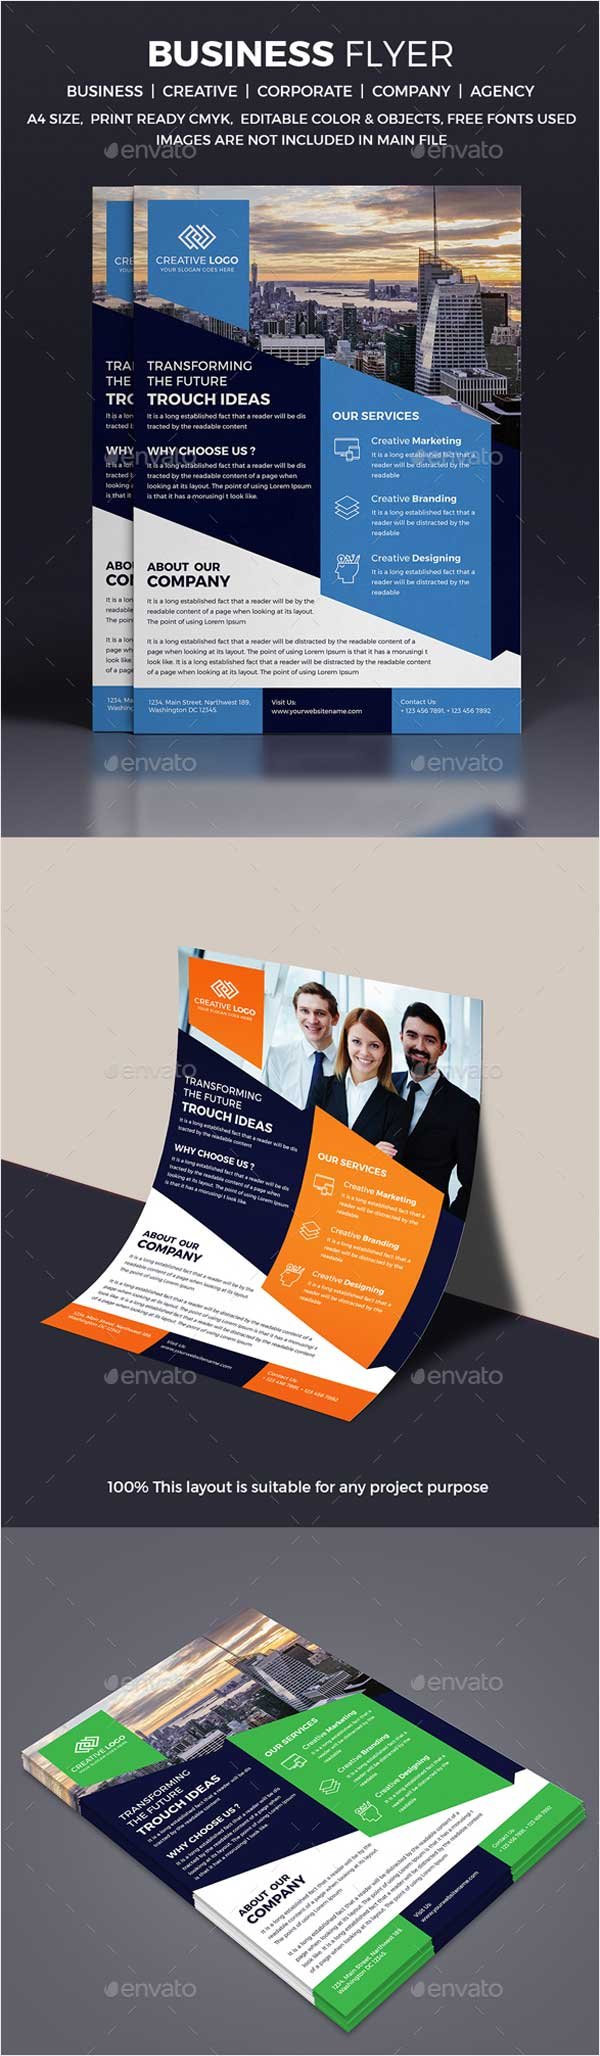 Business-Flyer-31